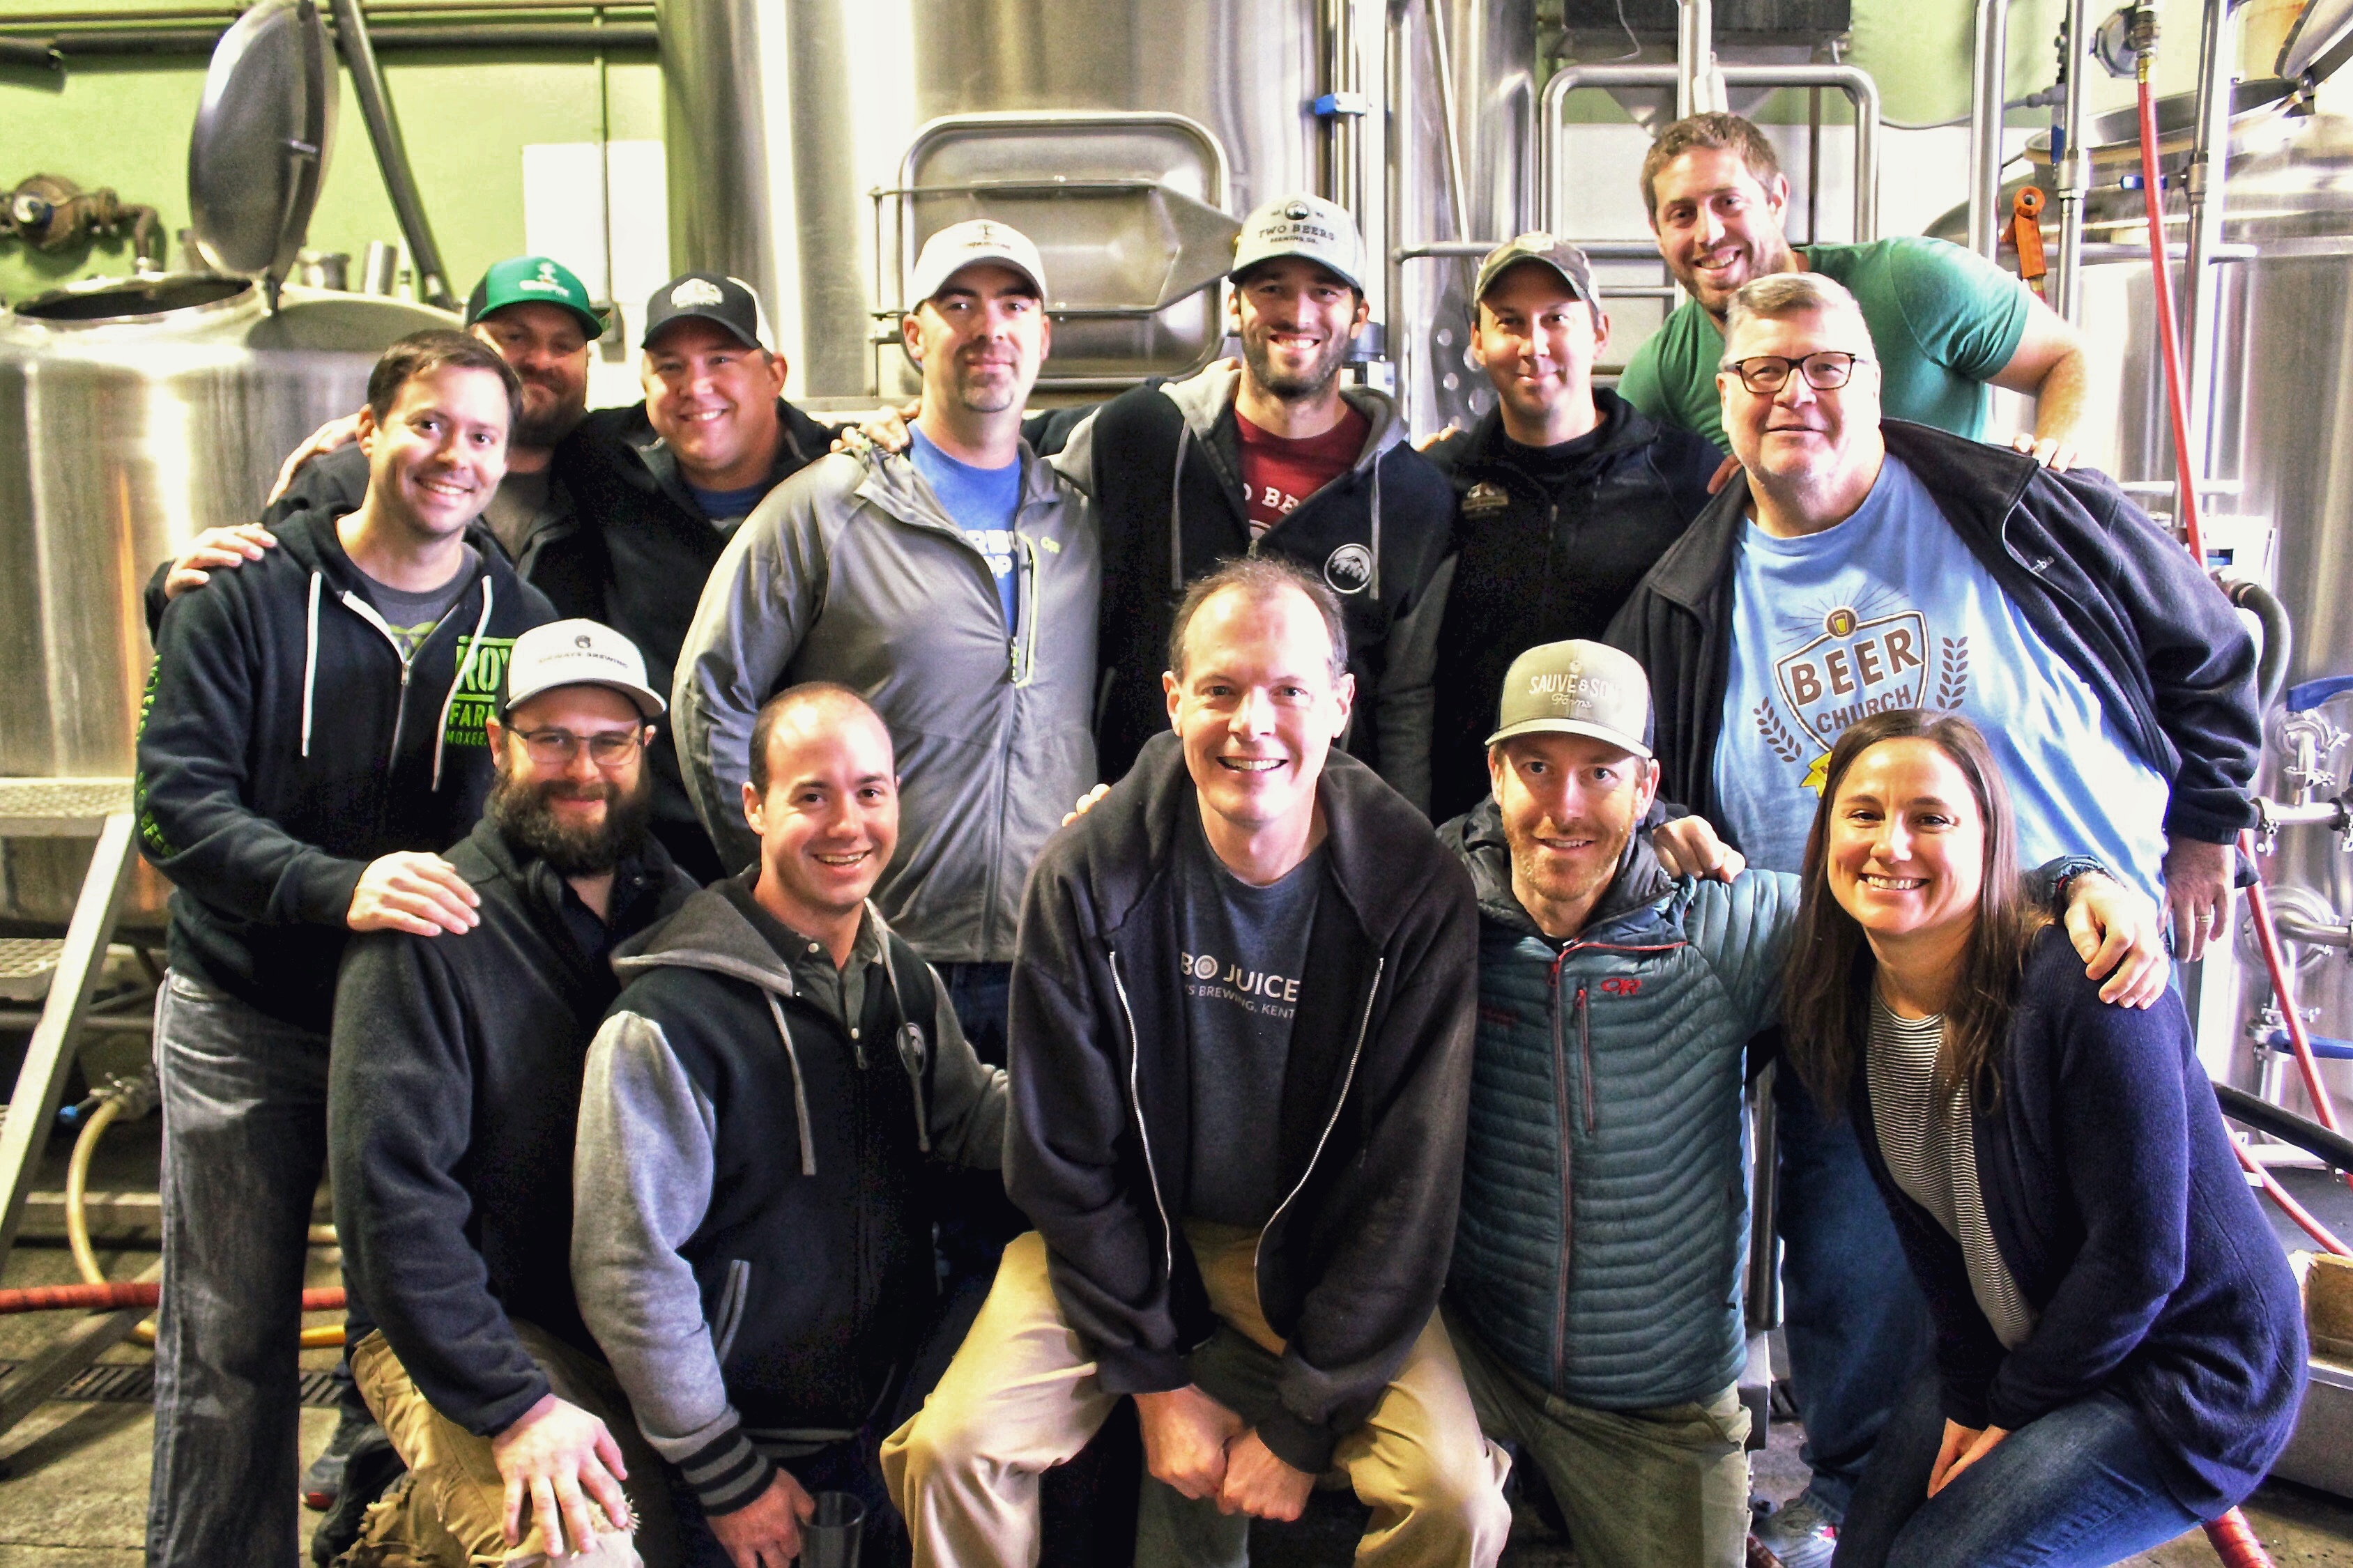 image of the group from Beer Church taht consists of Kendall Jones from the Washington Beer Blog, Two Beers Brewing, Airways Brewing and Georgetown Brewing courtesy of Two Beers Brewing